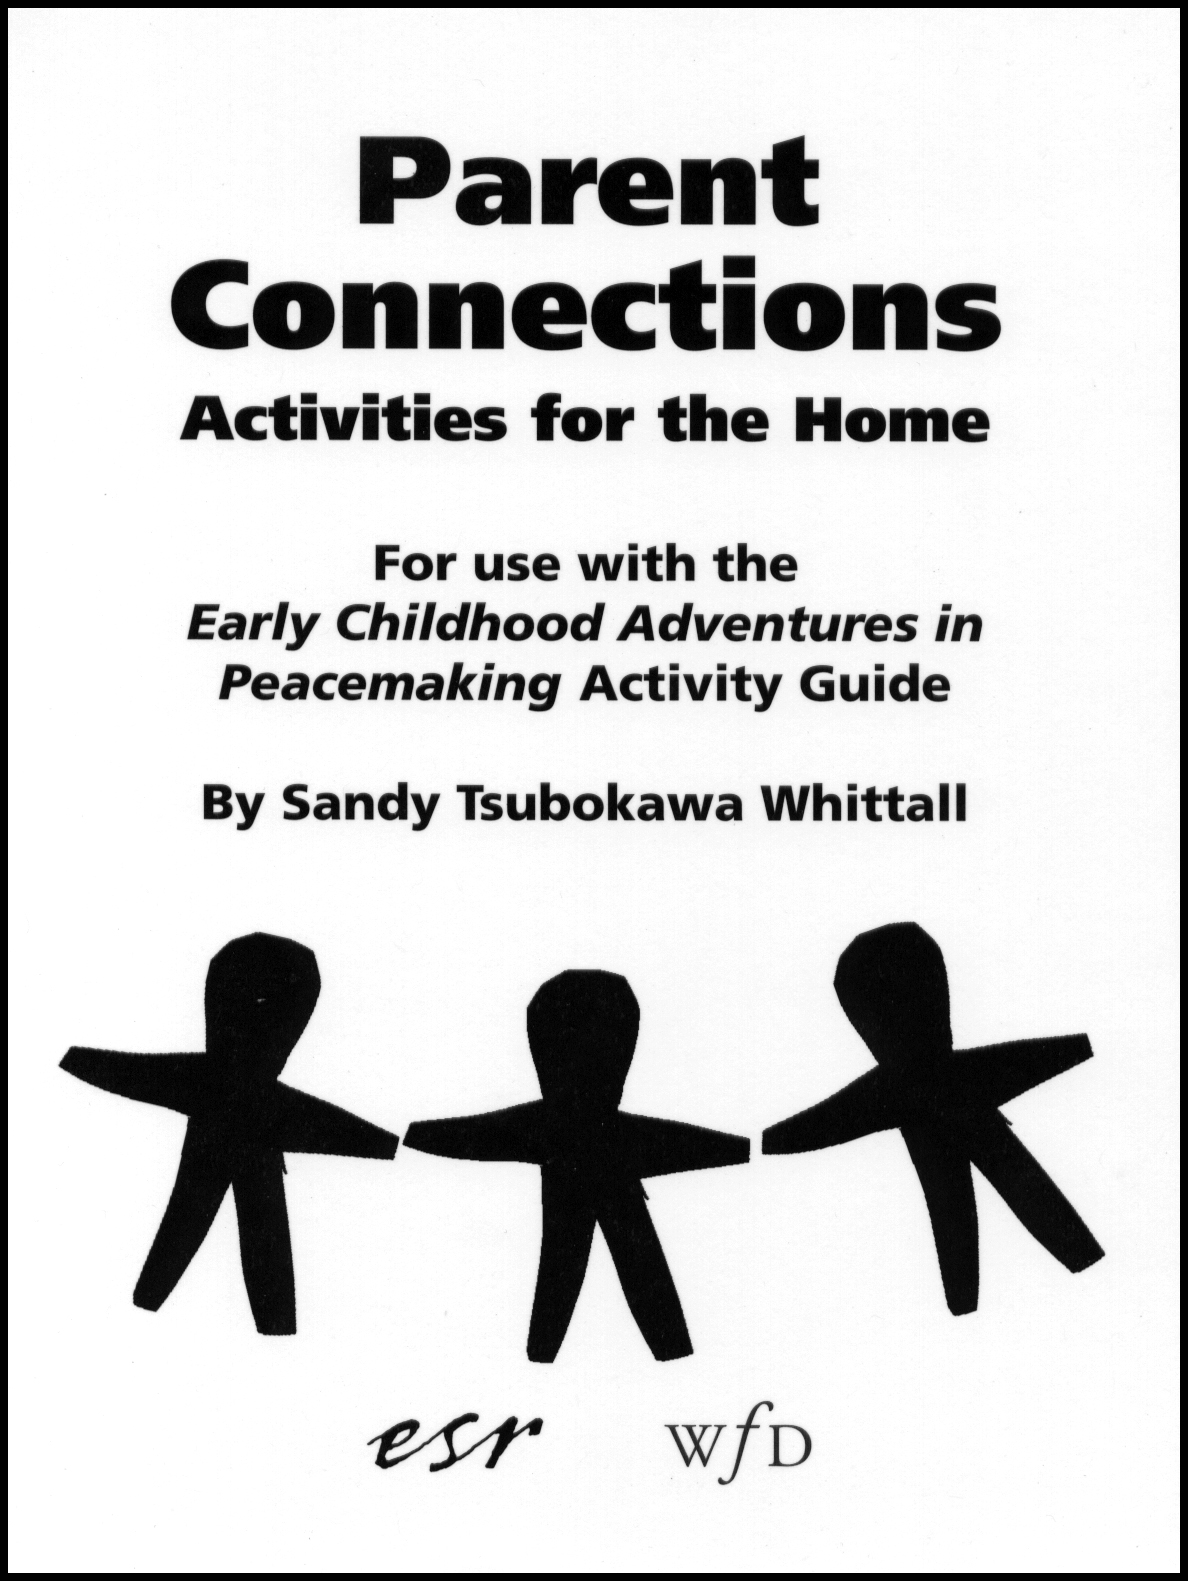 Early Childhood Adventures in Peacemaking Parent Handouts (ECHPAR)